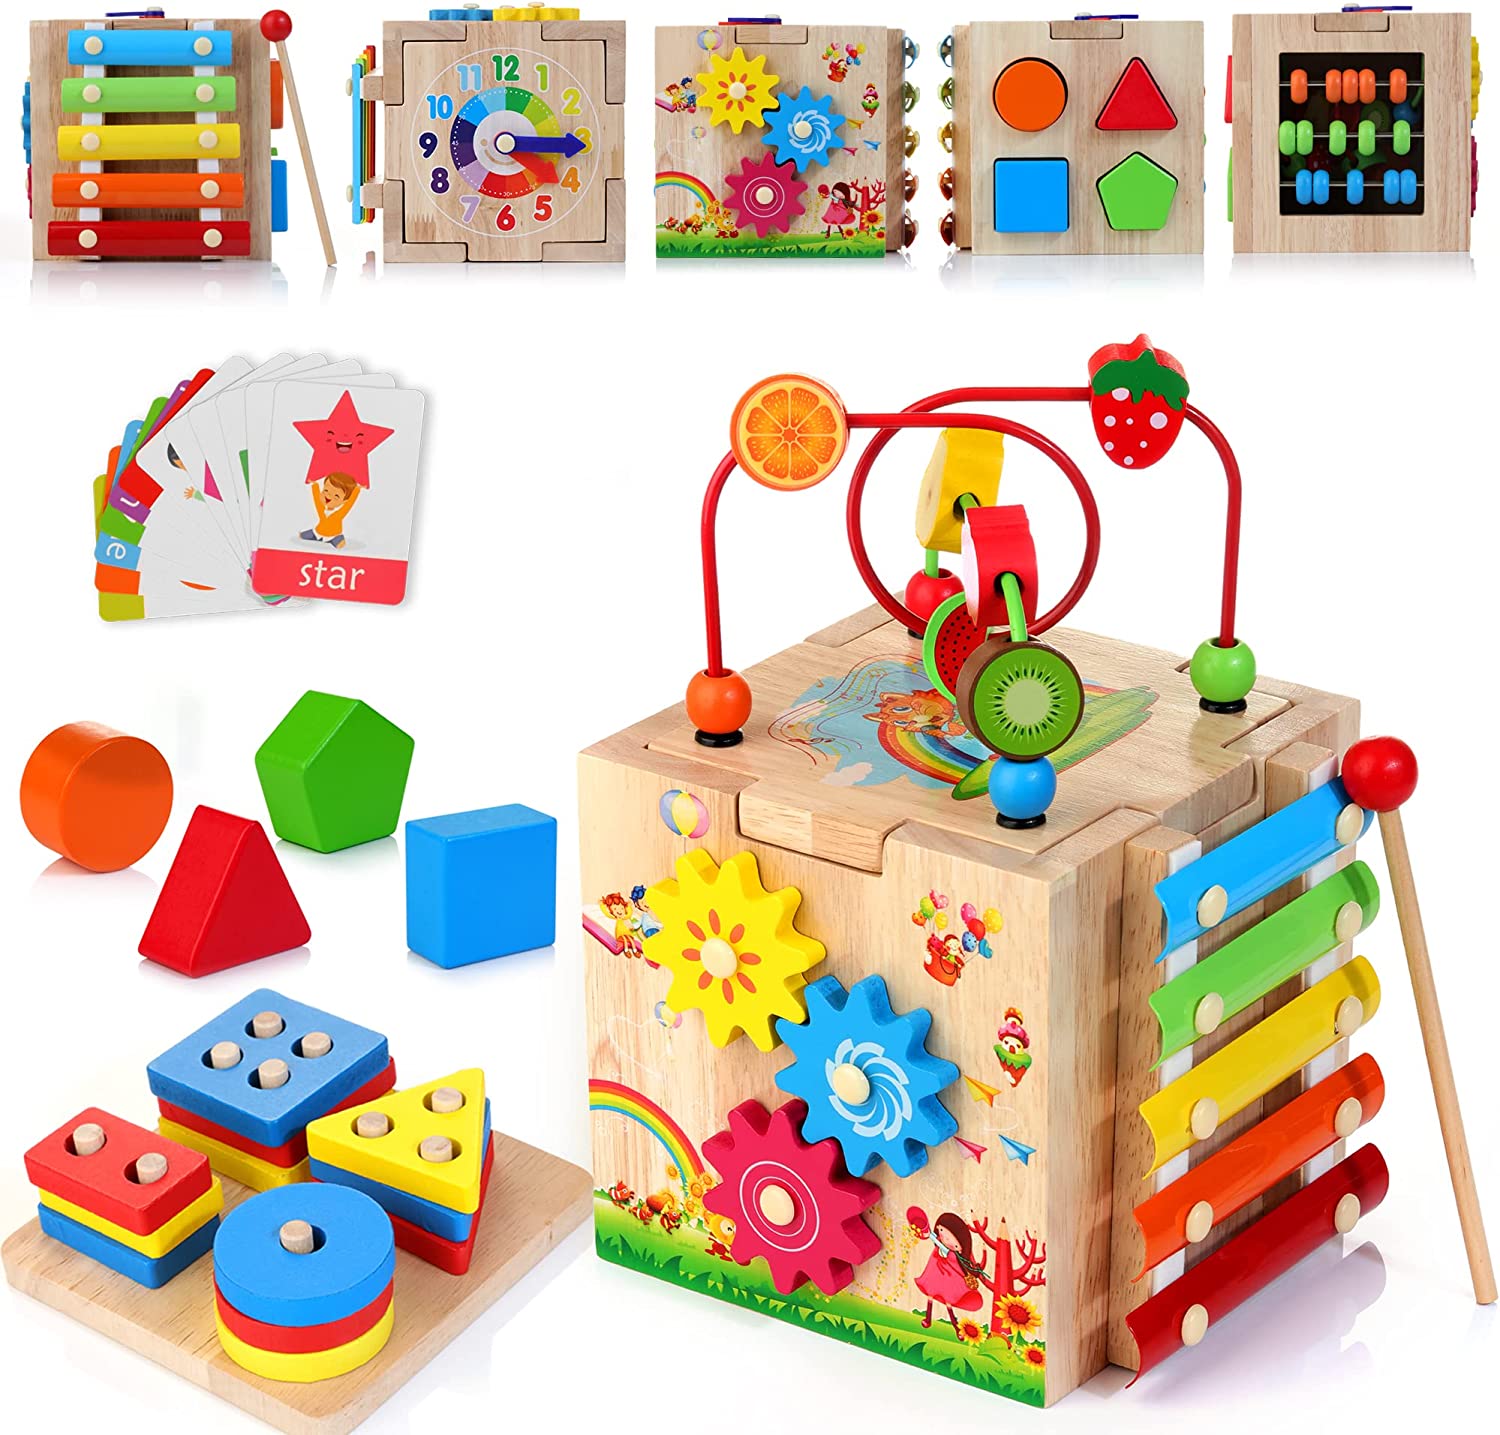 Wooden activity cube educational toy to encourage inquisitive minds in baby girls